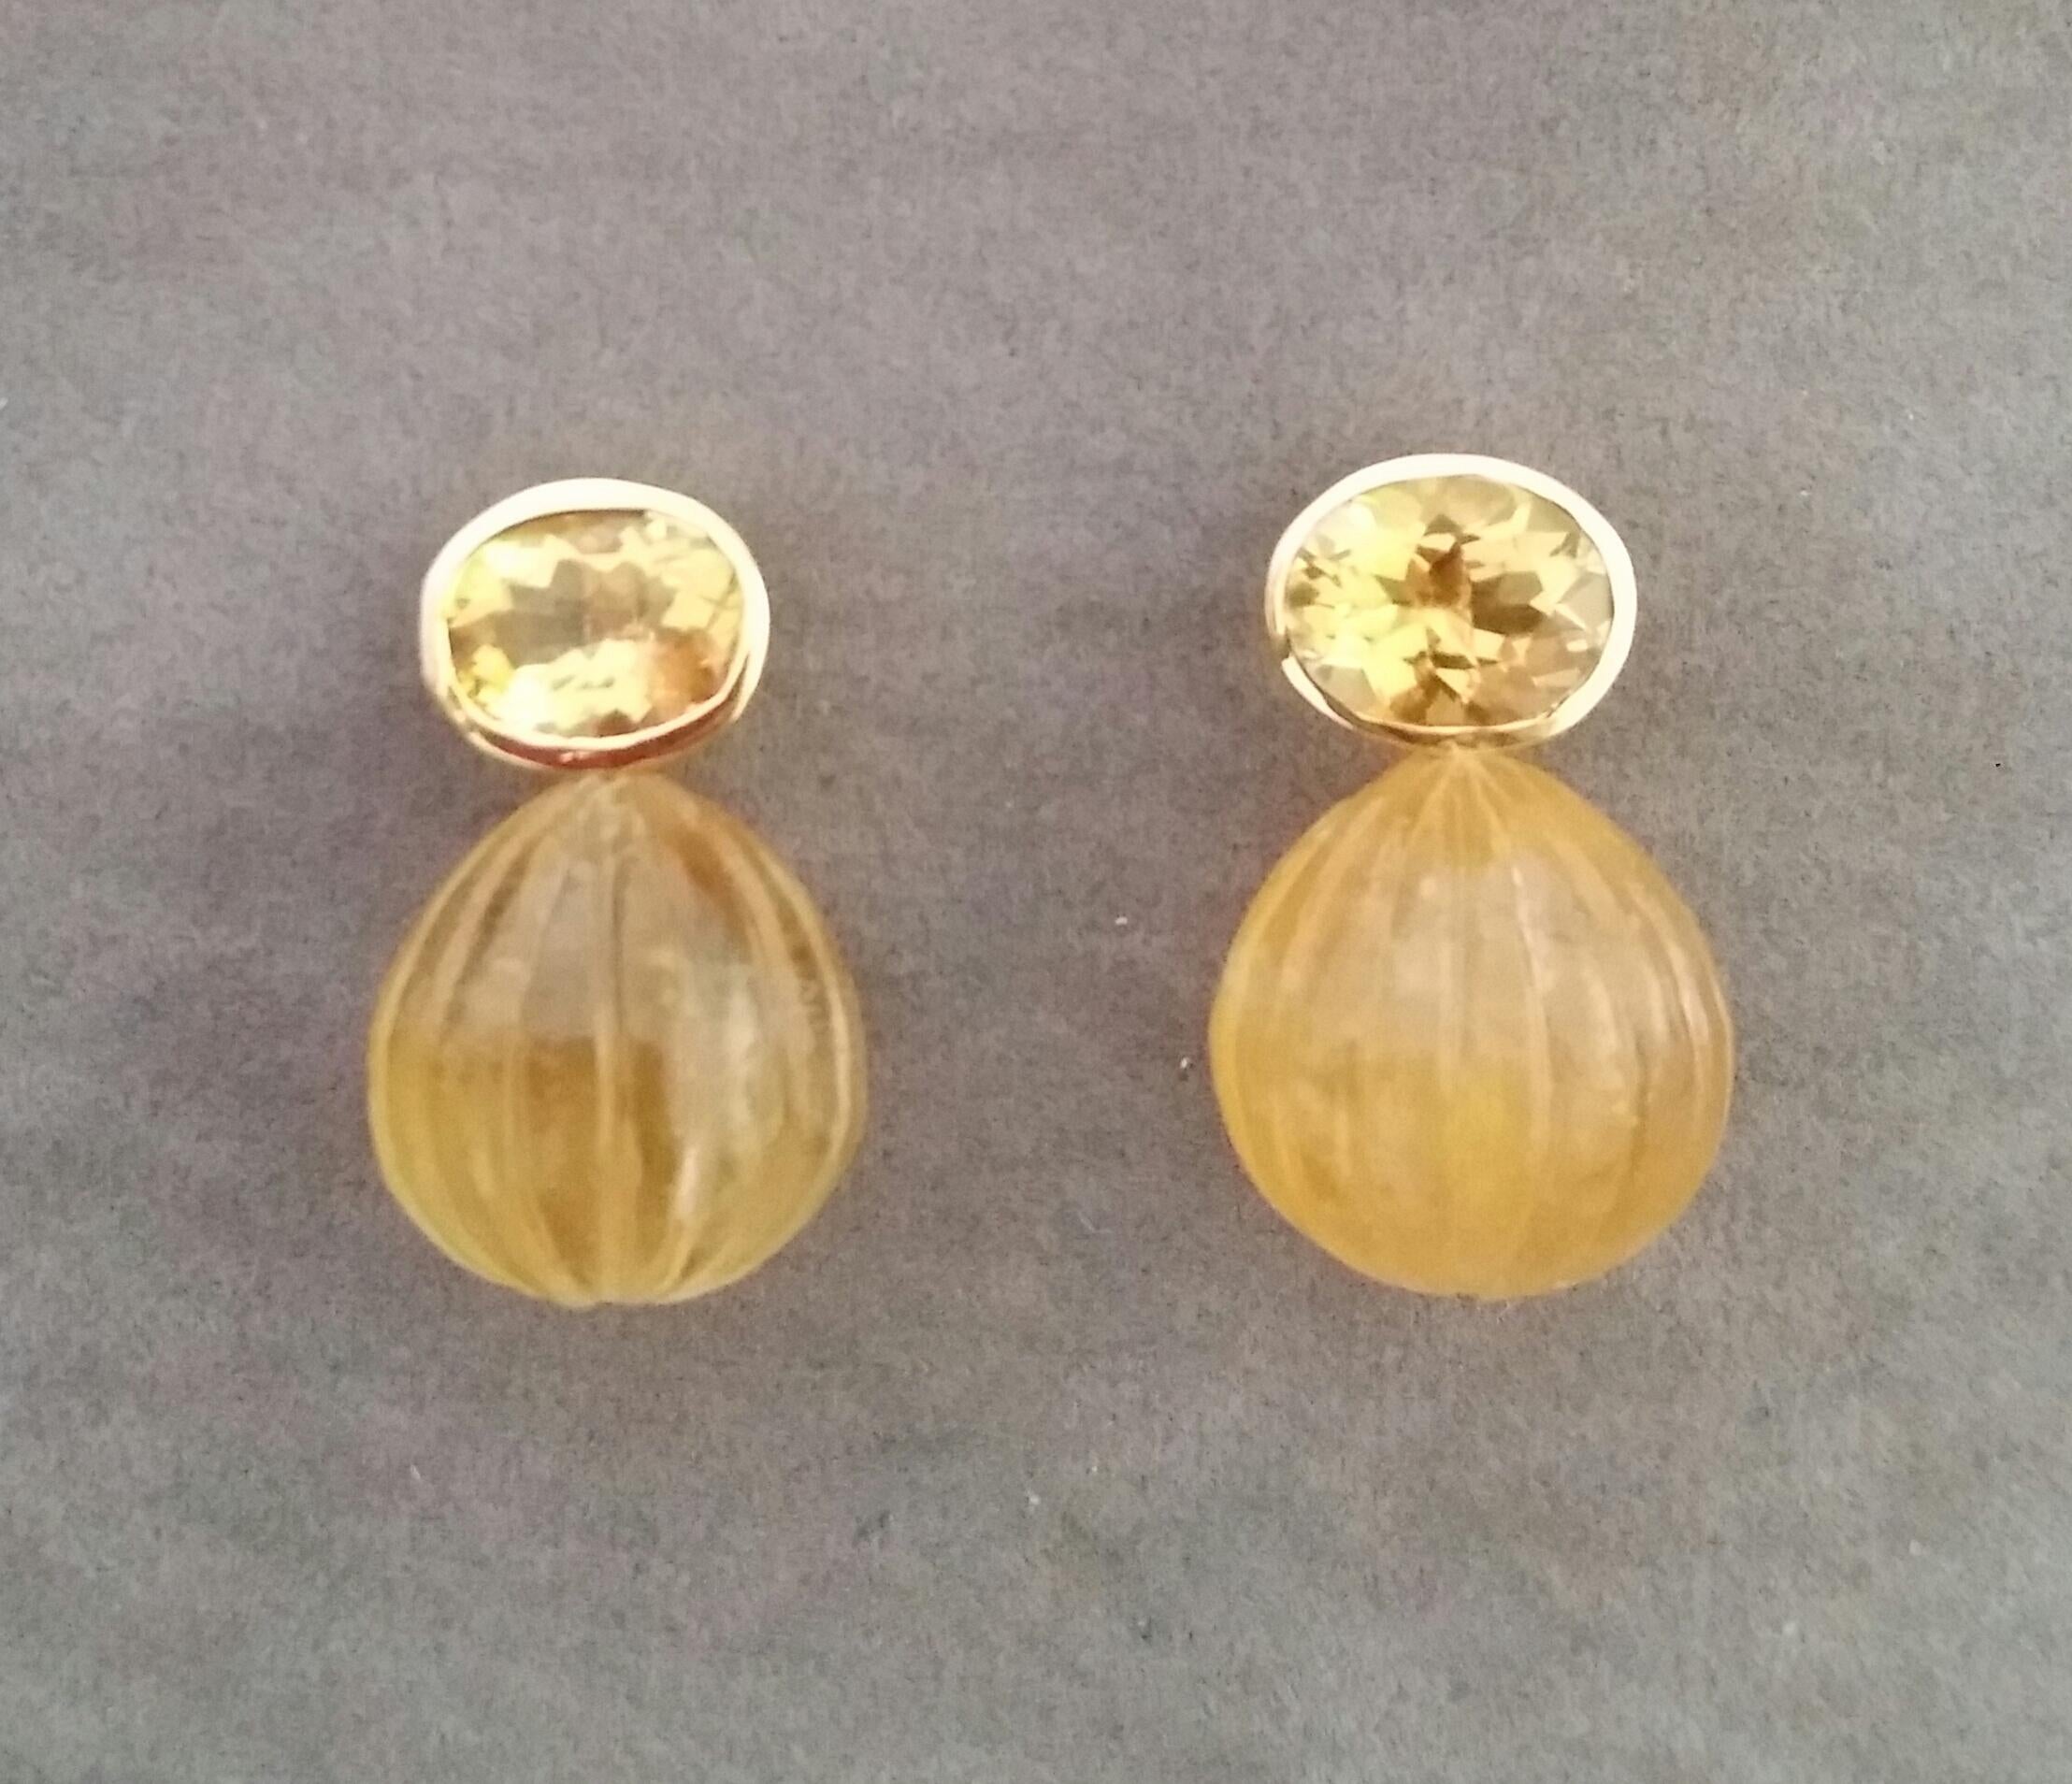 These simple but elegant and completely handmade earrings have 2 Oval Shape Faceted  Natural Citrines measuring 9 x 11 mm set in yellow gold bezel at the top to which are suspended 2  Engraved Citrine Round Drops measuring 15x15 mm.

In 1978 our